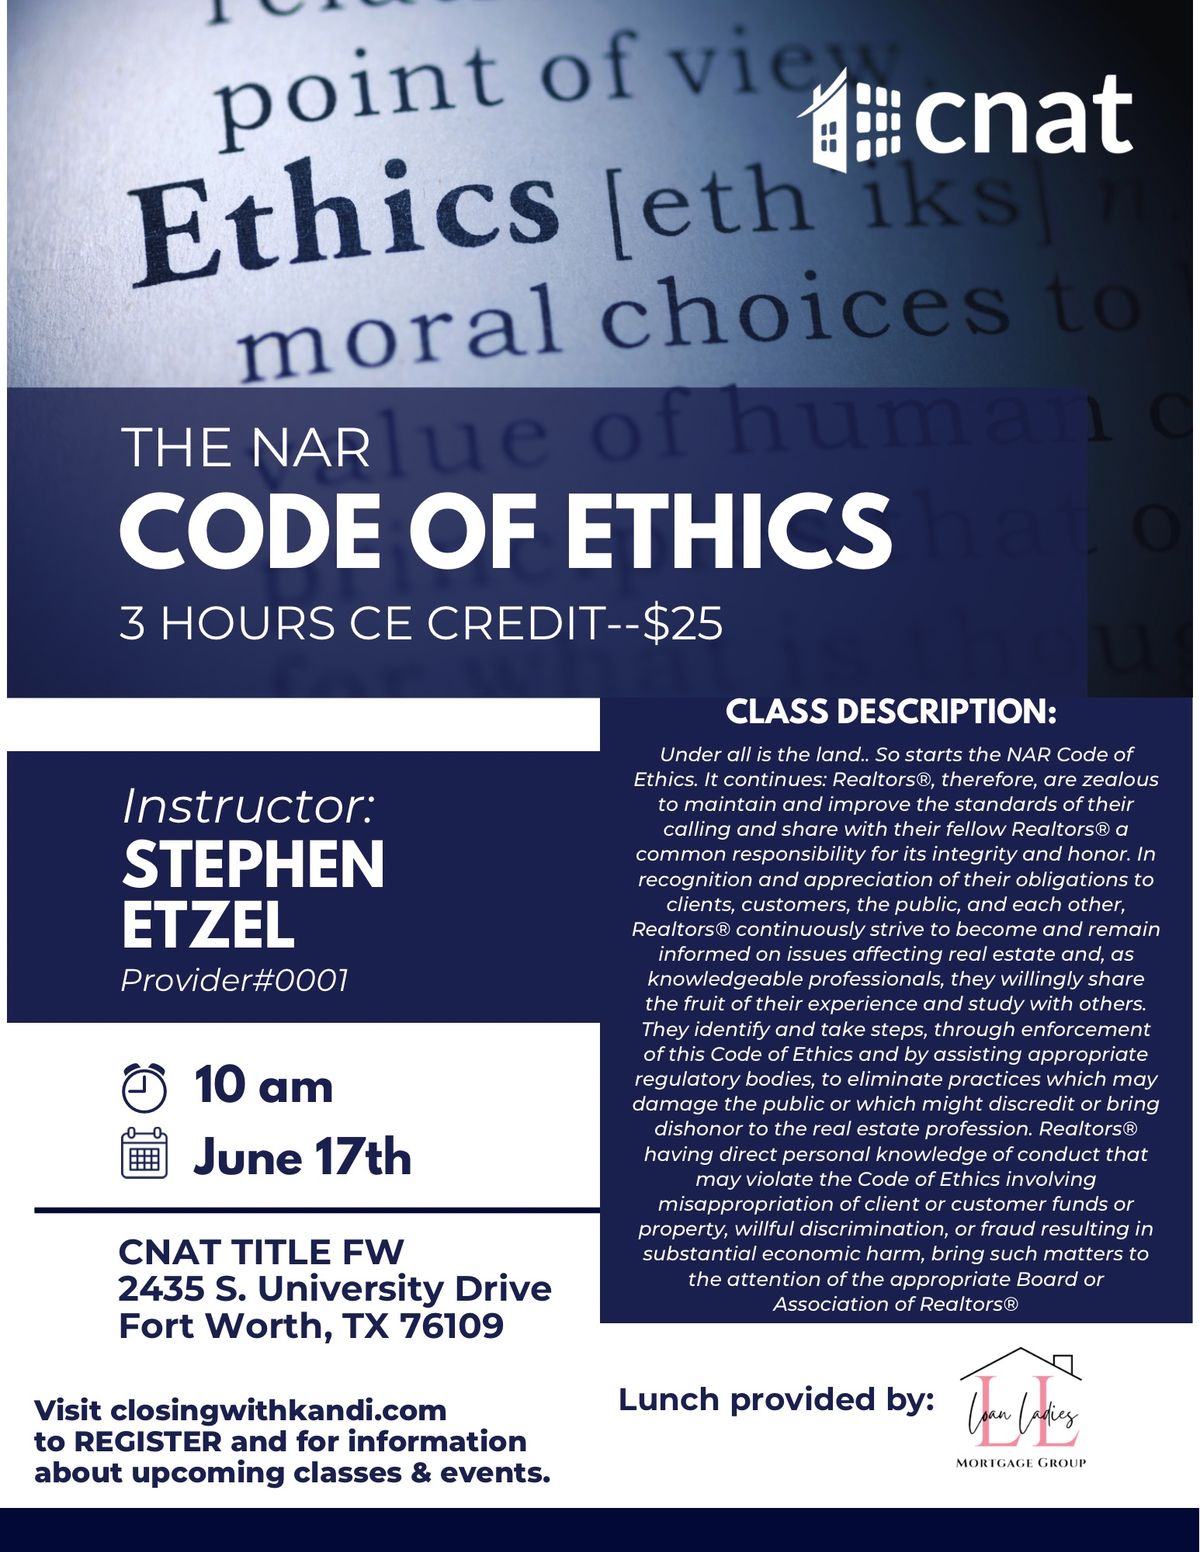 The NAR Code of Ethics Class